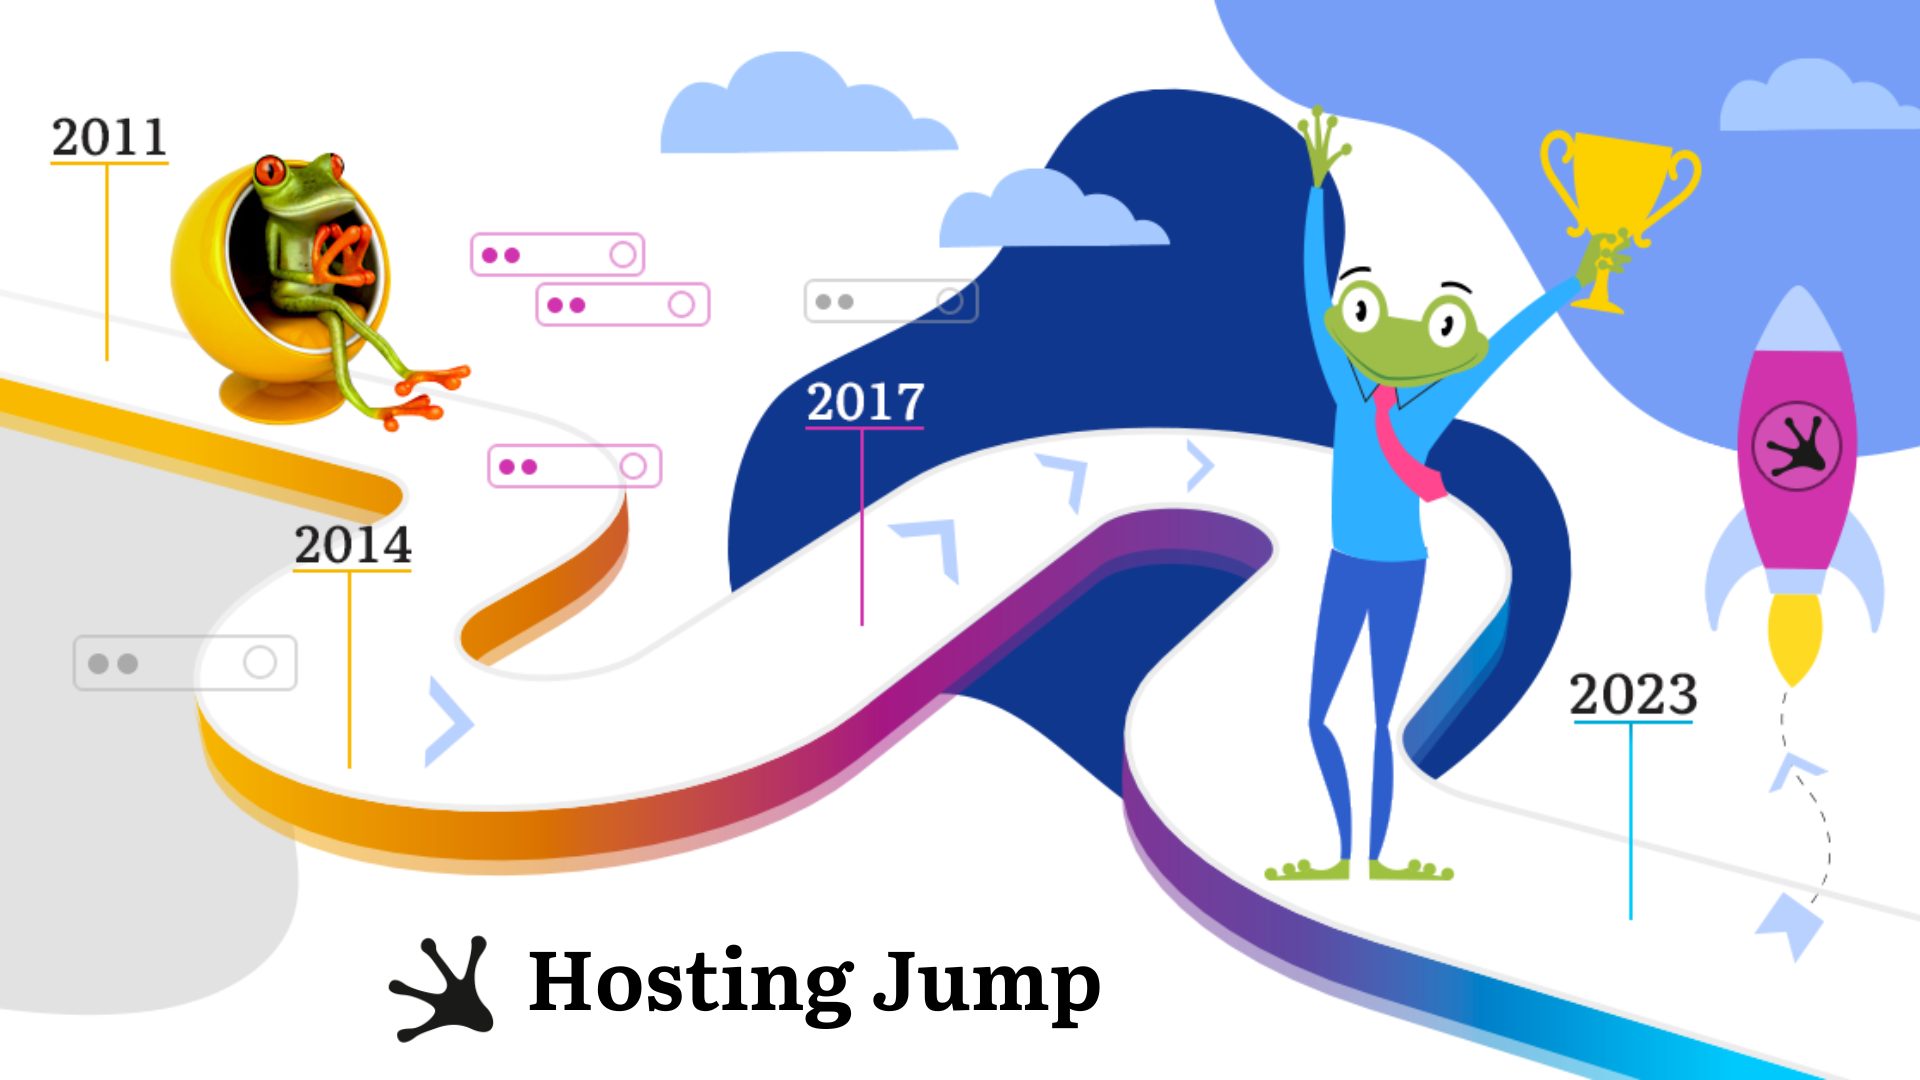 Hosting Jump: The success story from 2011 until today